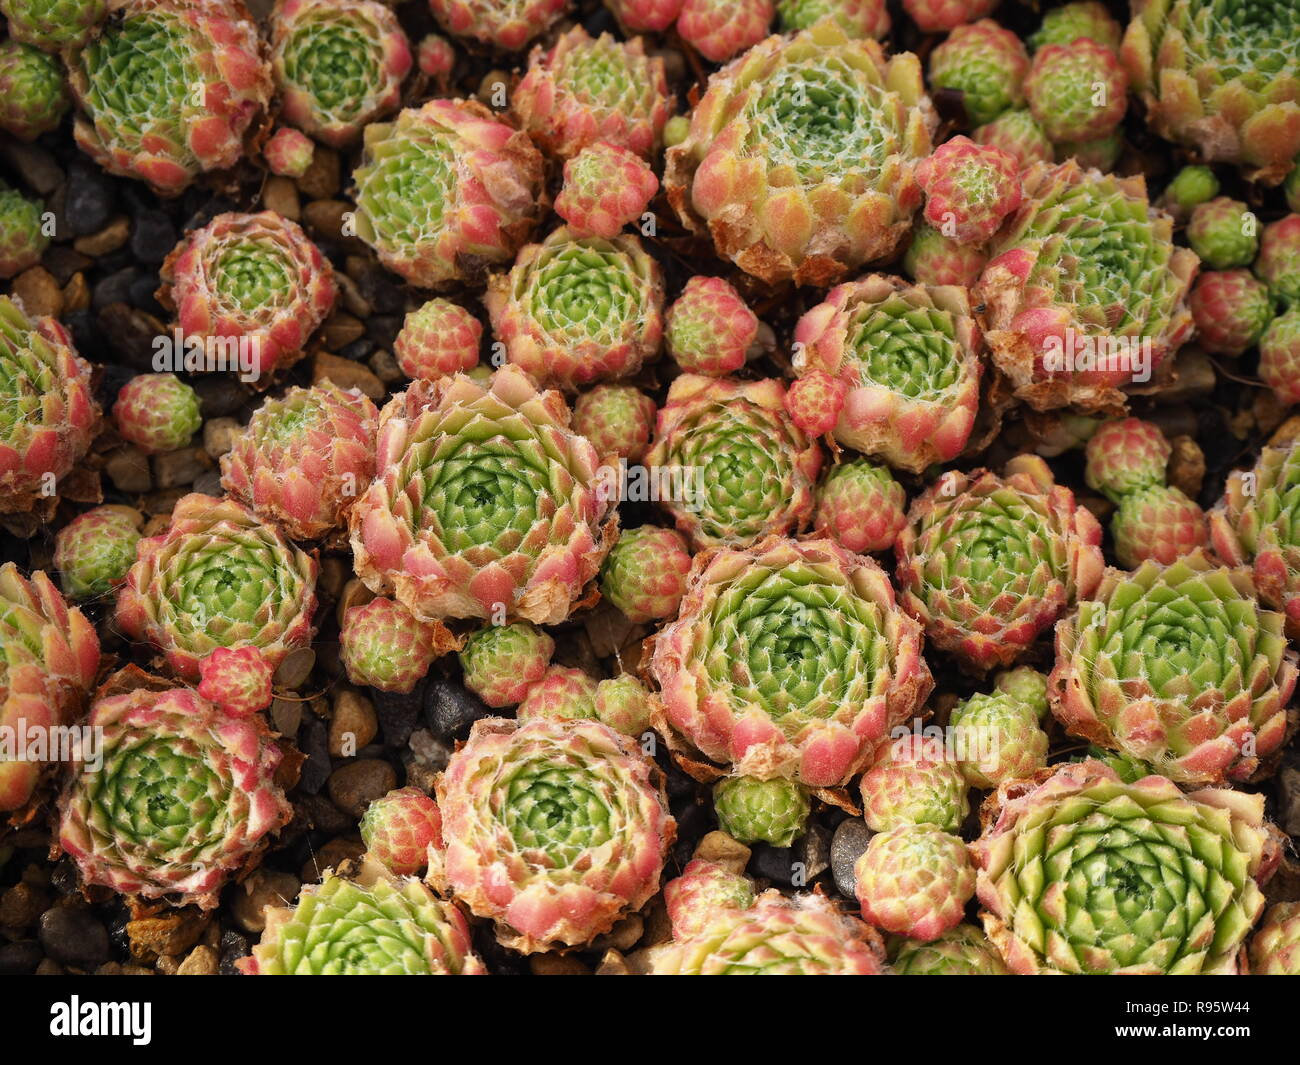 Sempervivum arachnoideum succulent plant with pink and green leaves seen from above Stock Photo